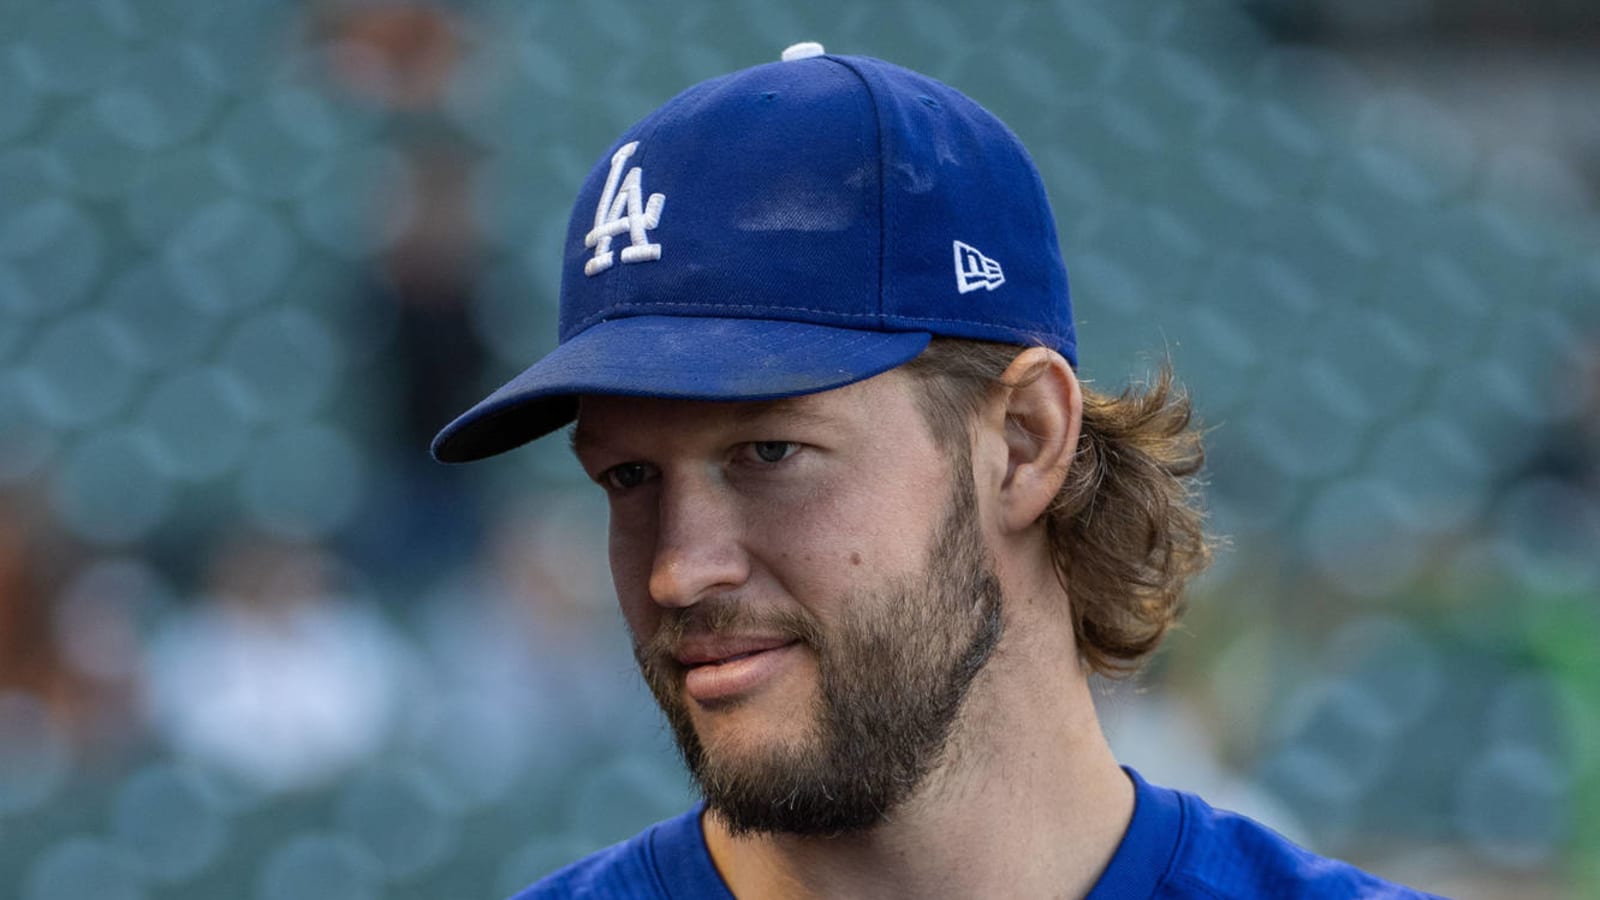 Clayton Kershaw doesn't receive qualifying offer from Dodgers